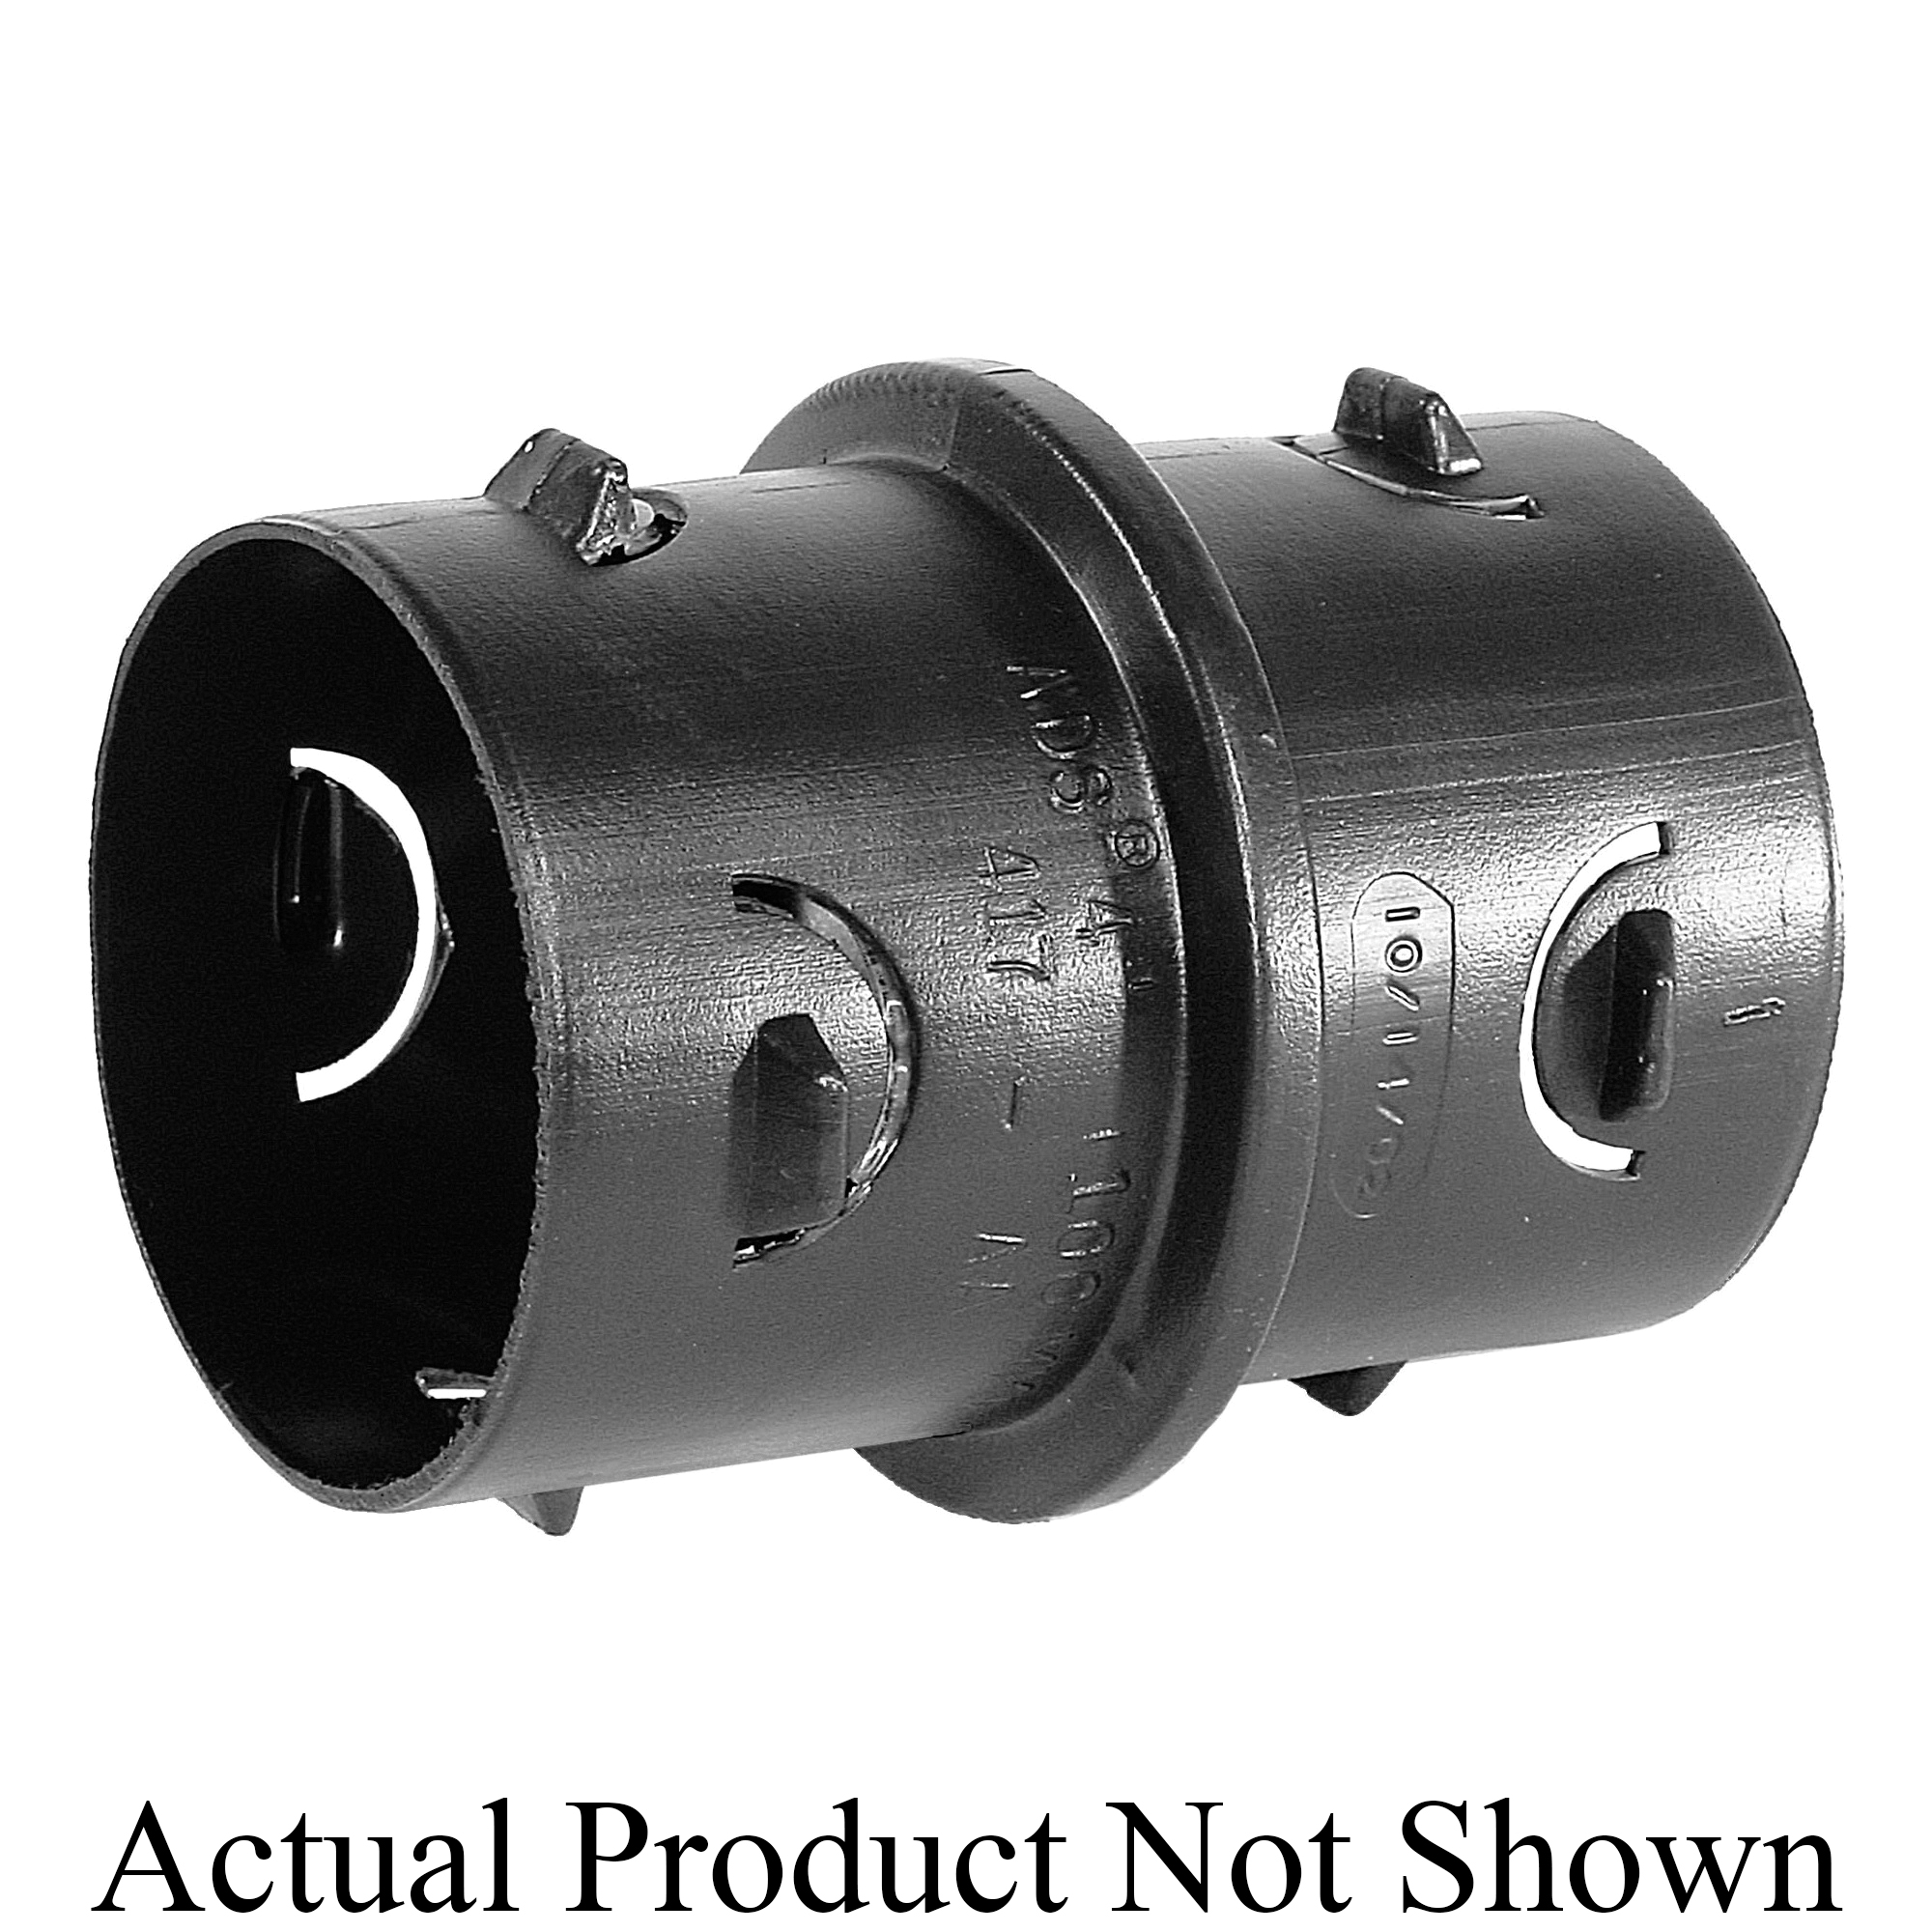 ADS® 0815AA Internal Coupler, For Use With Single Wall Pipe, 8 in, HDPE, Domestic